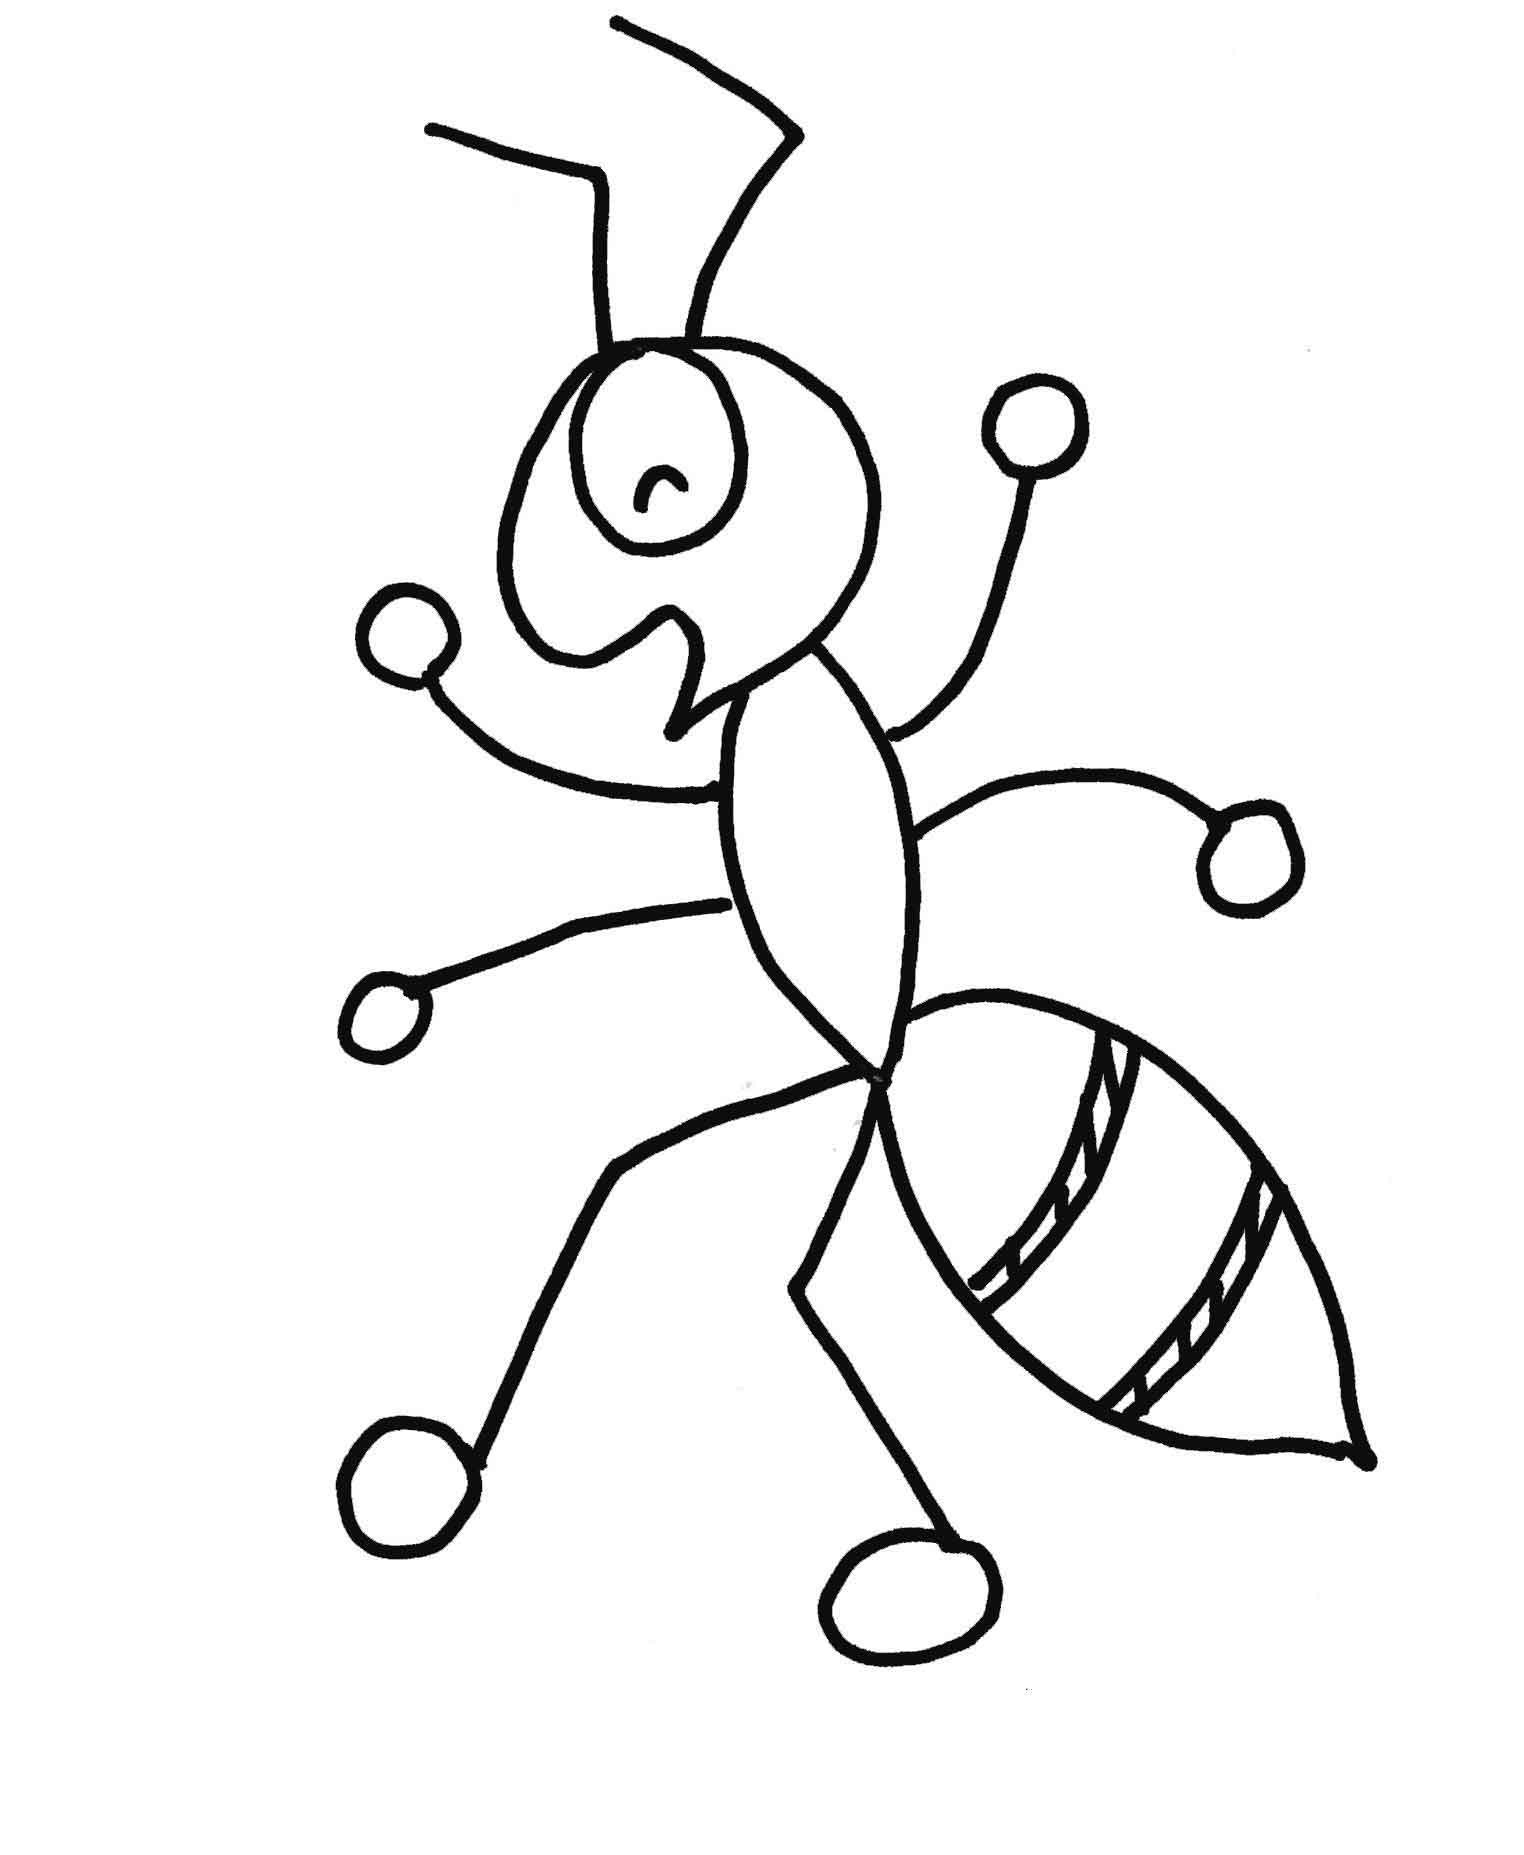 Ants coloring #1, Download drawings